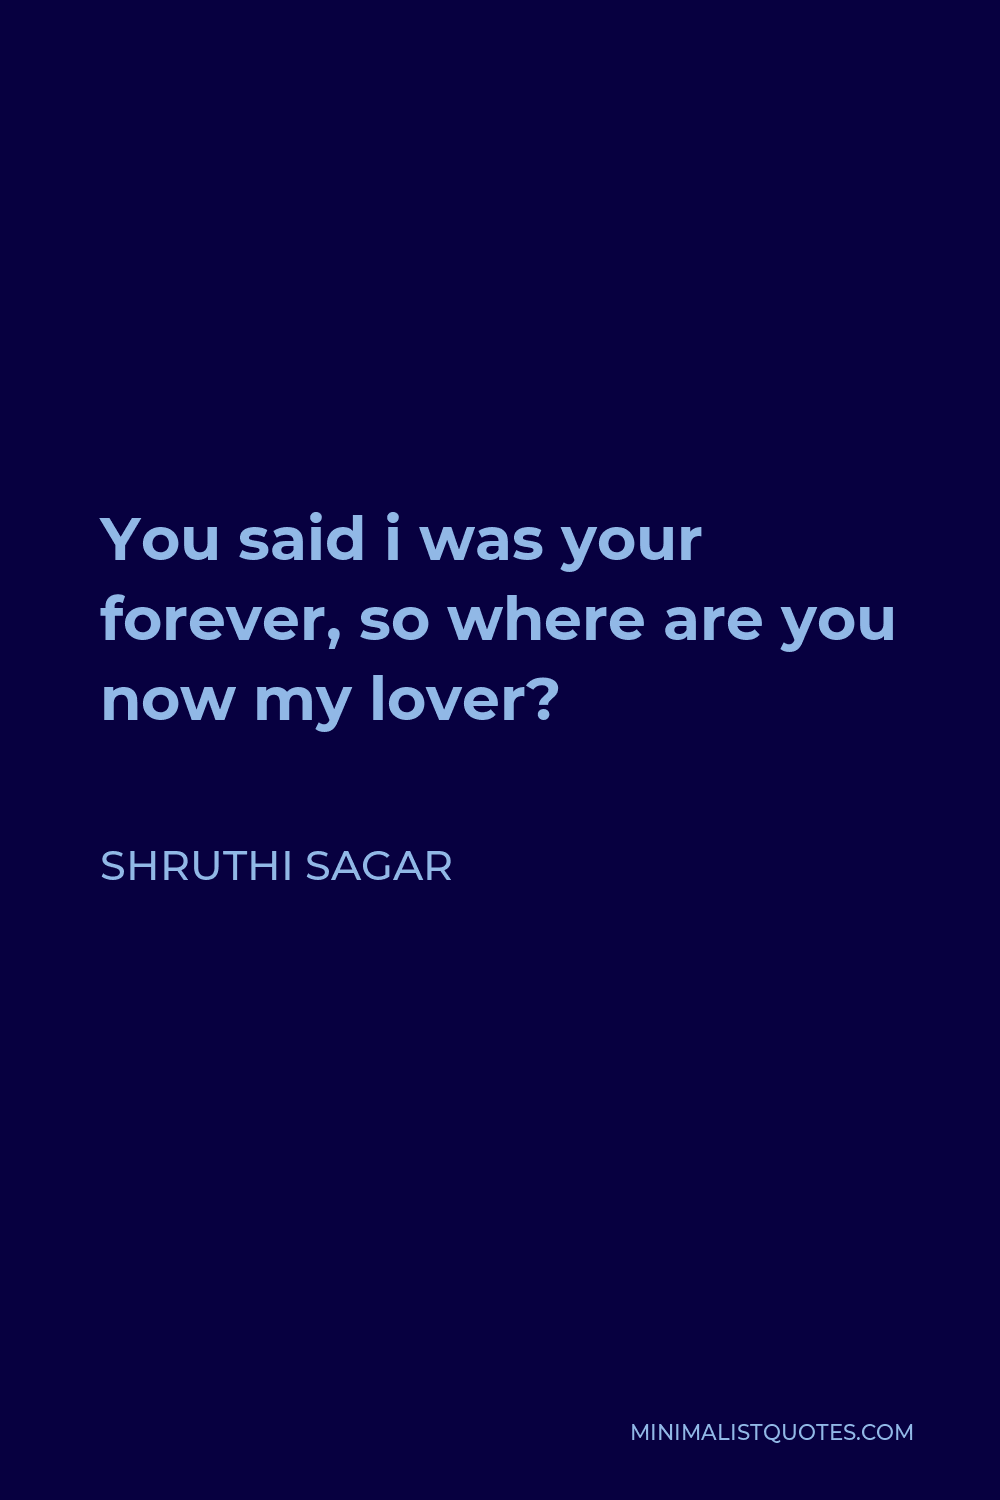 Shruthi Sagar Quote - You said i was your forever, so where are you now my lover?